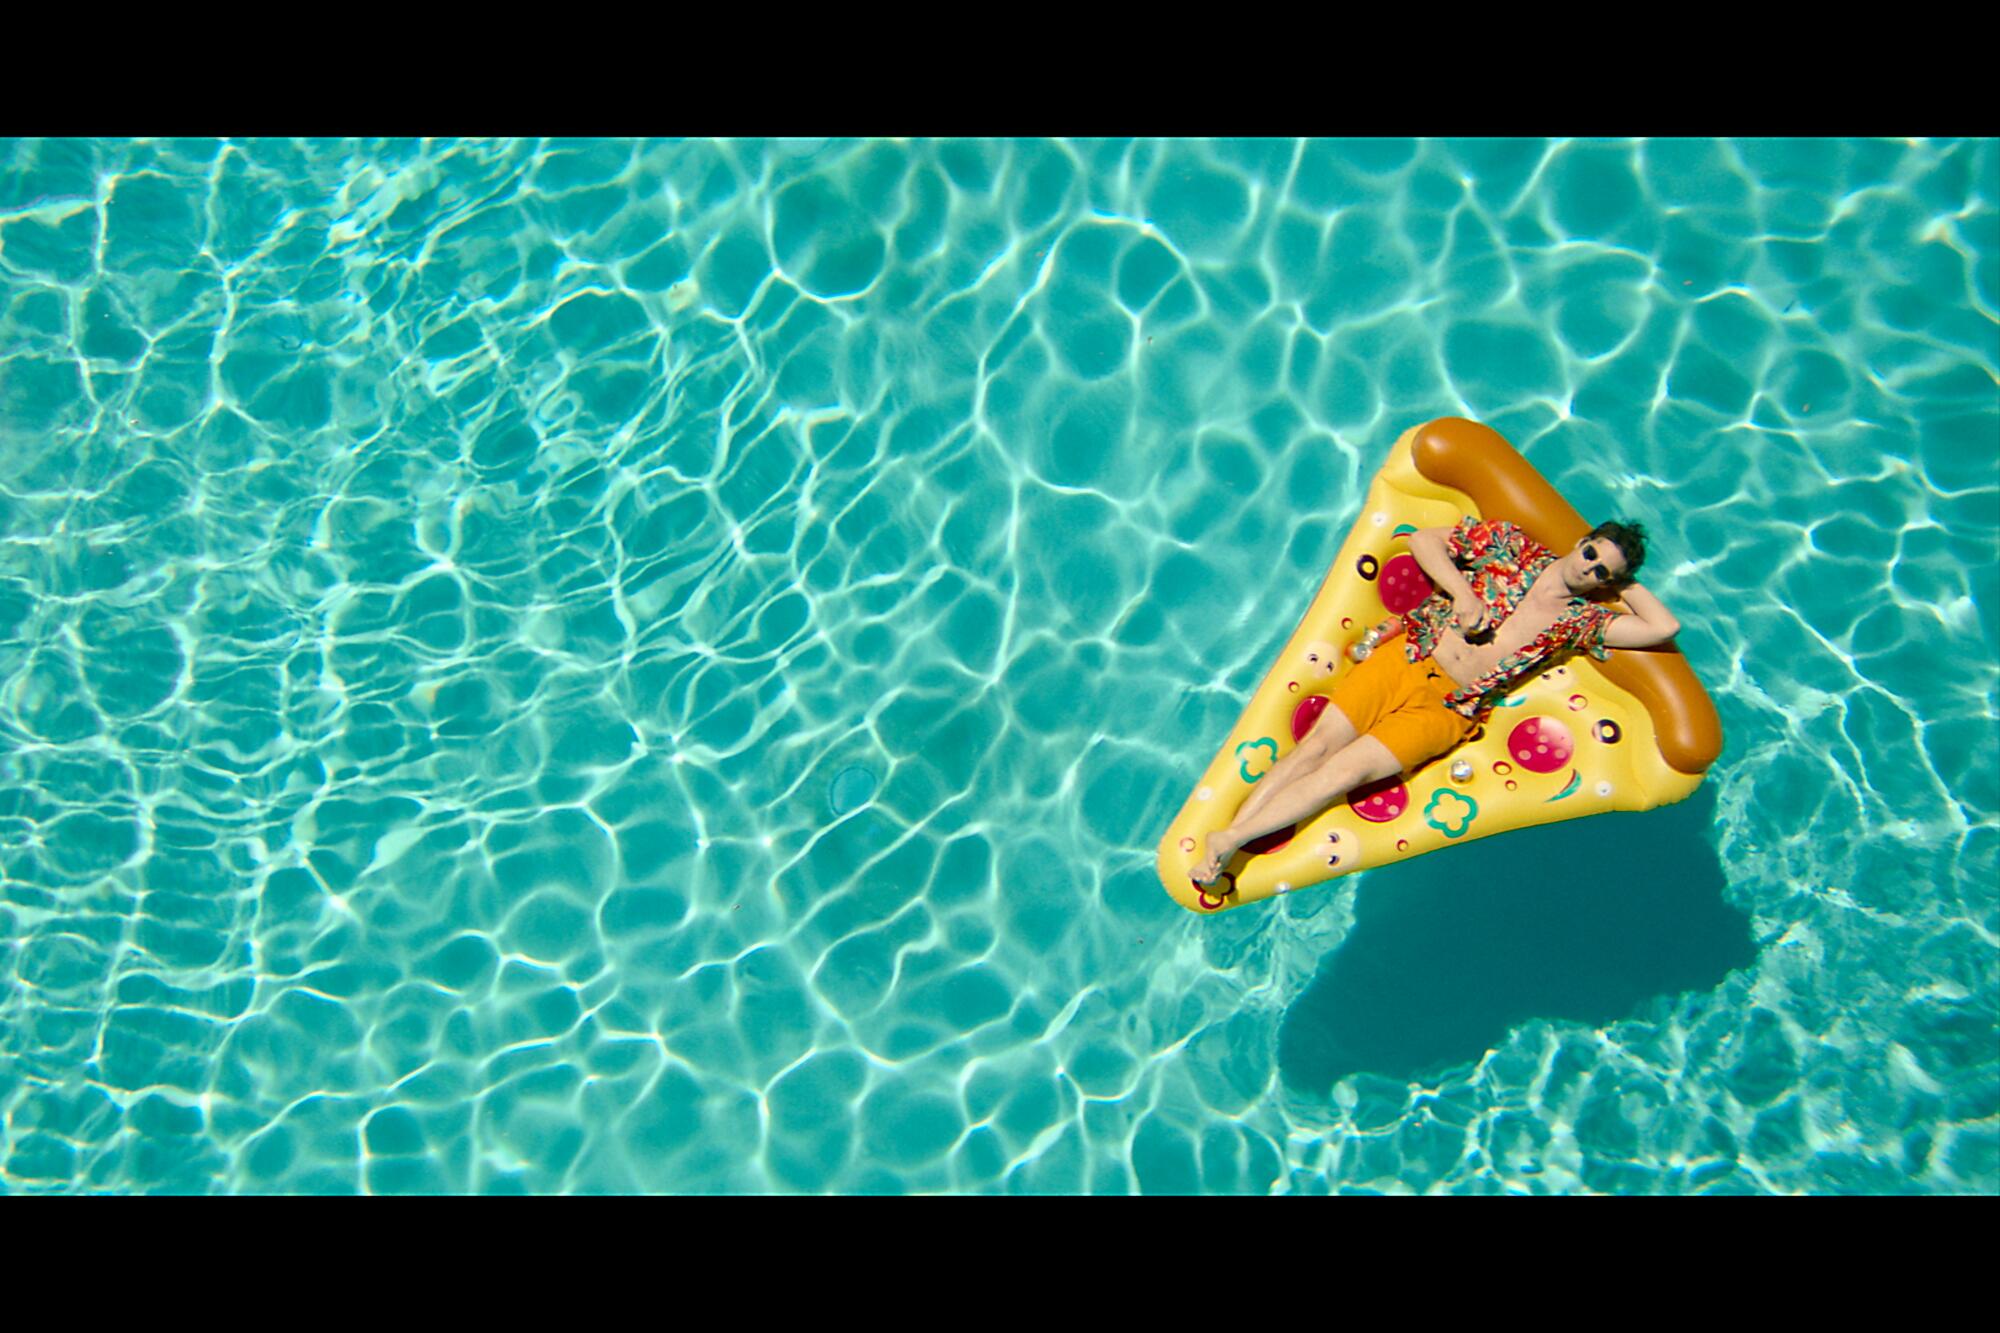 Andy Samberg lounges on a pizza-shaped float in a scene from "Palm Springs."  